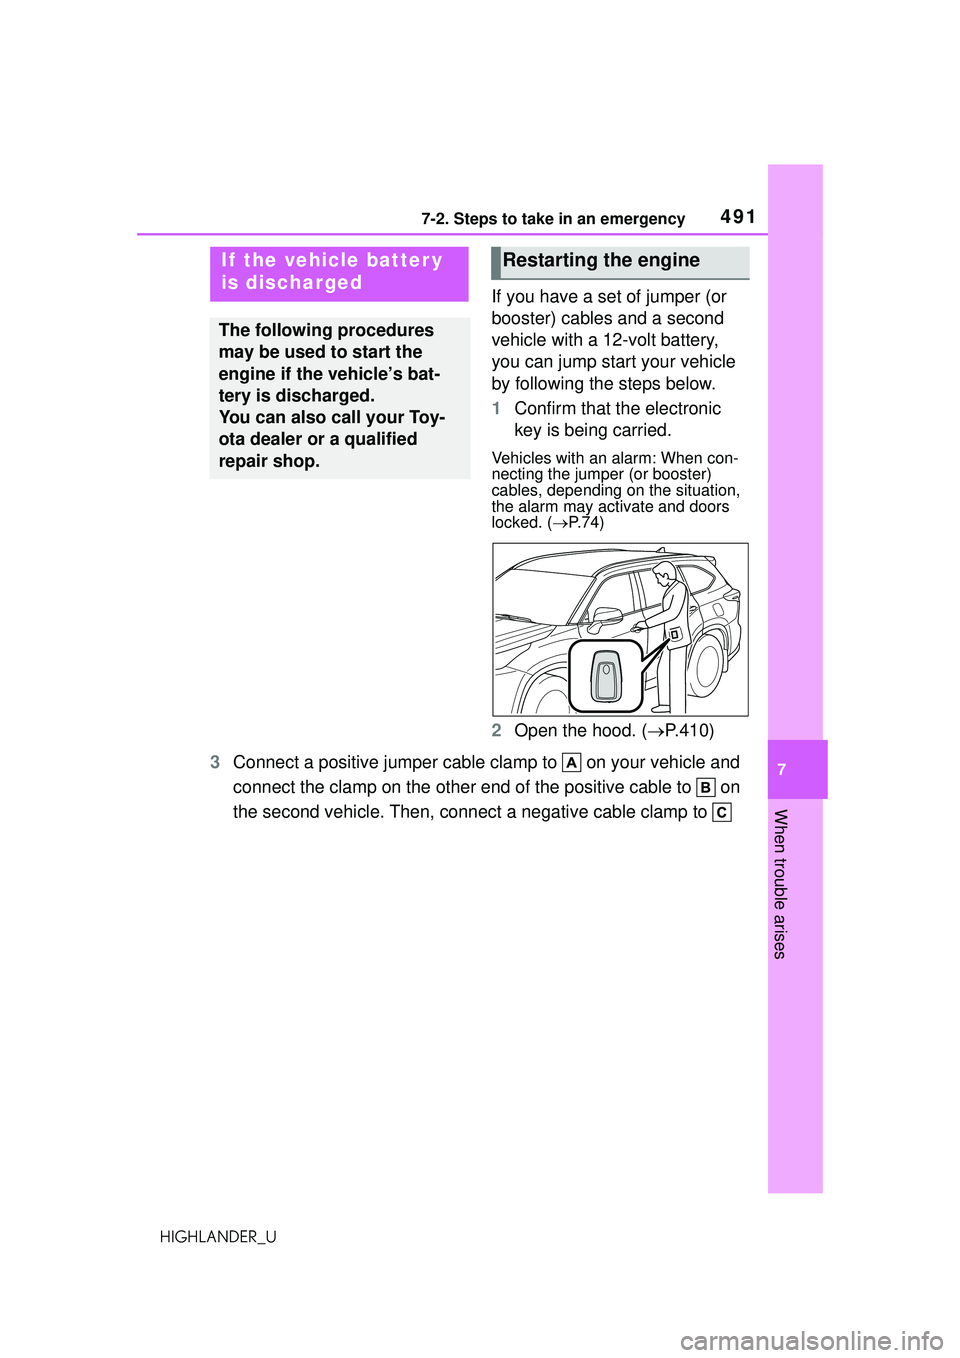 TOYOTA HIGHLANDER 2021  Owners Manual (in English) 4917-2. Steps to take in an emergency
7
When trouble arises
HIGHLANDER_U
If you have a set of jumper (or 
booster) cables and a second 
vehicle with a 12-volt battery, 
you can jump start your vehicle